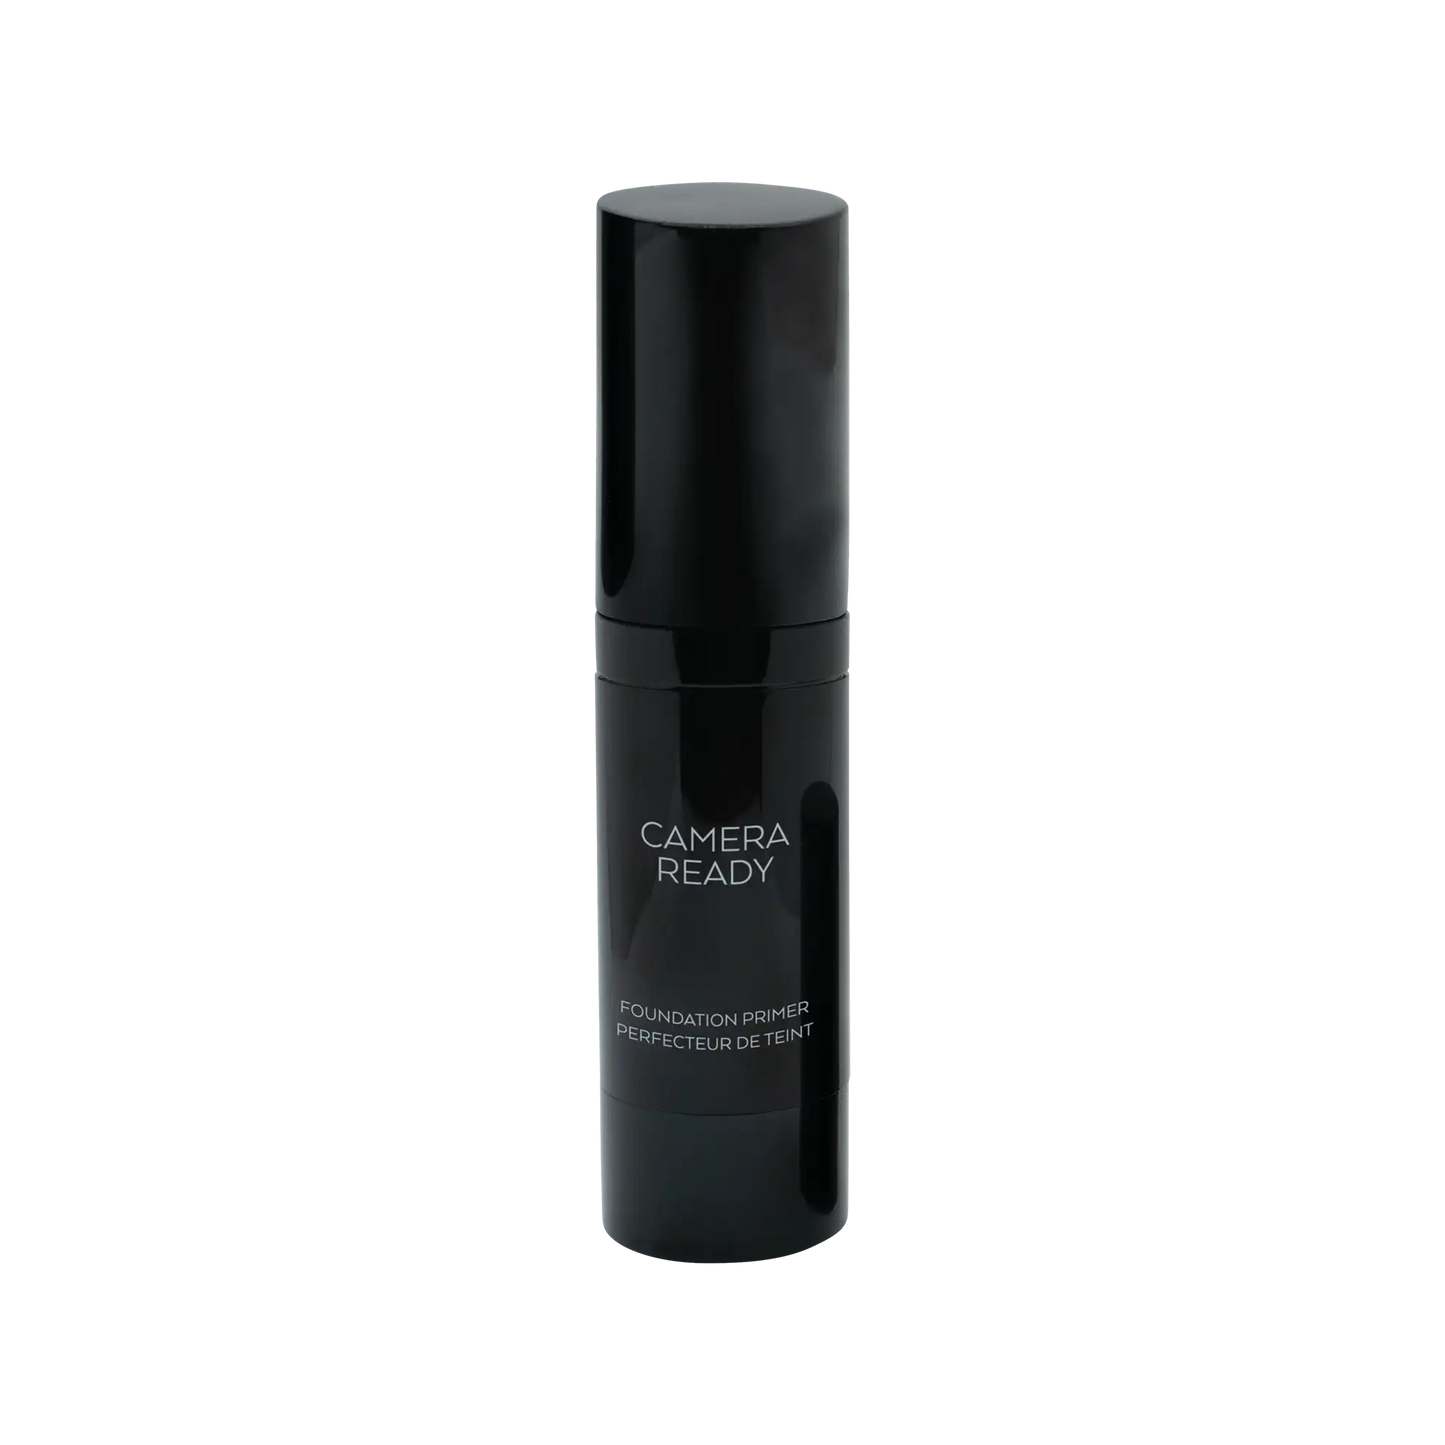 Foundation Primer - Product of North America